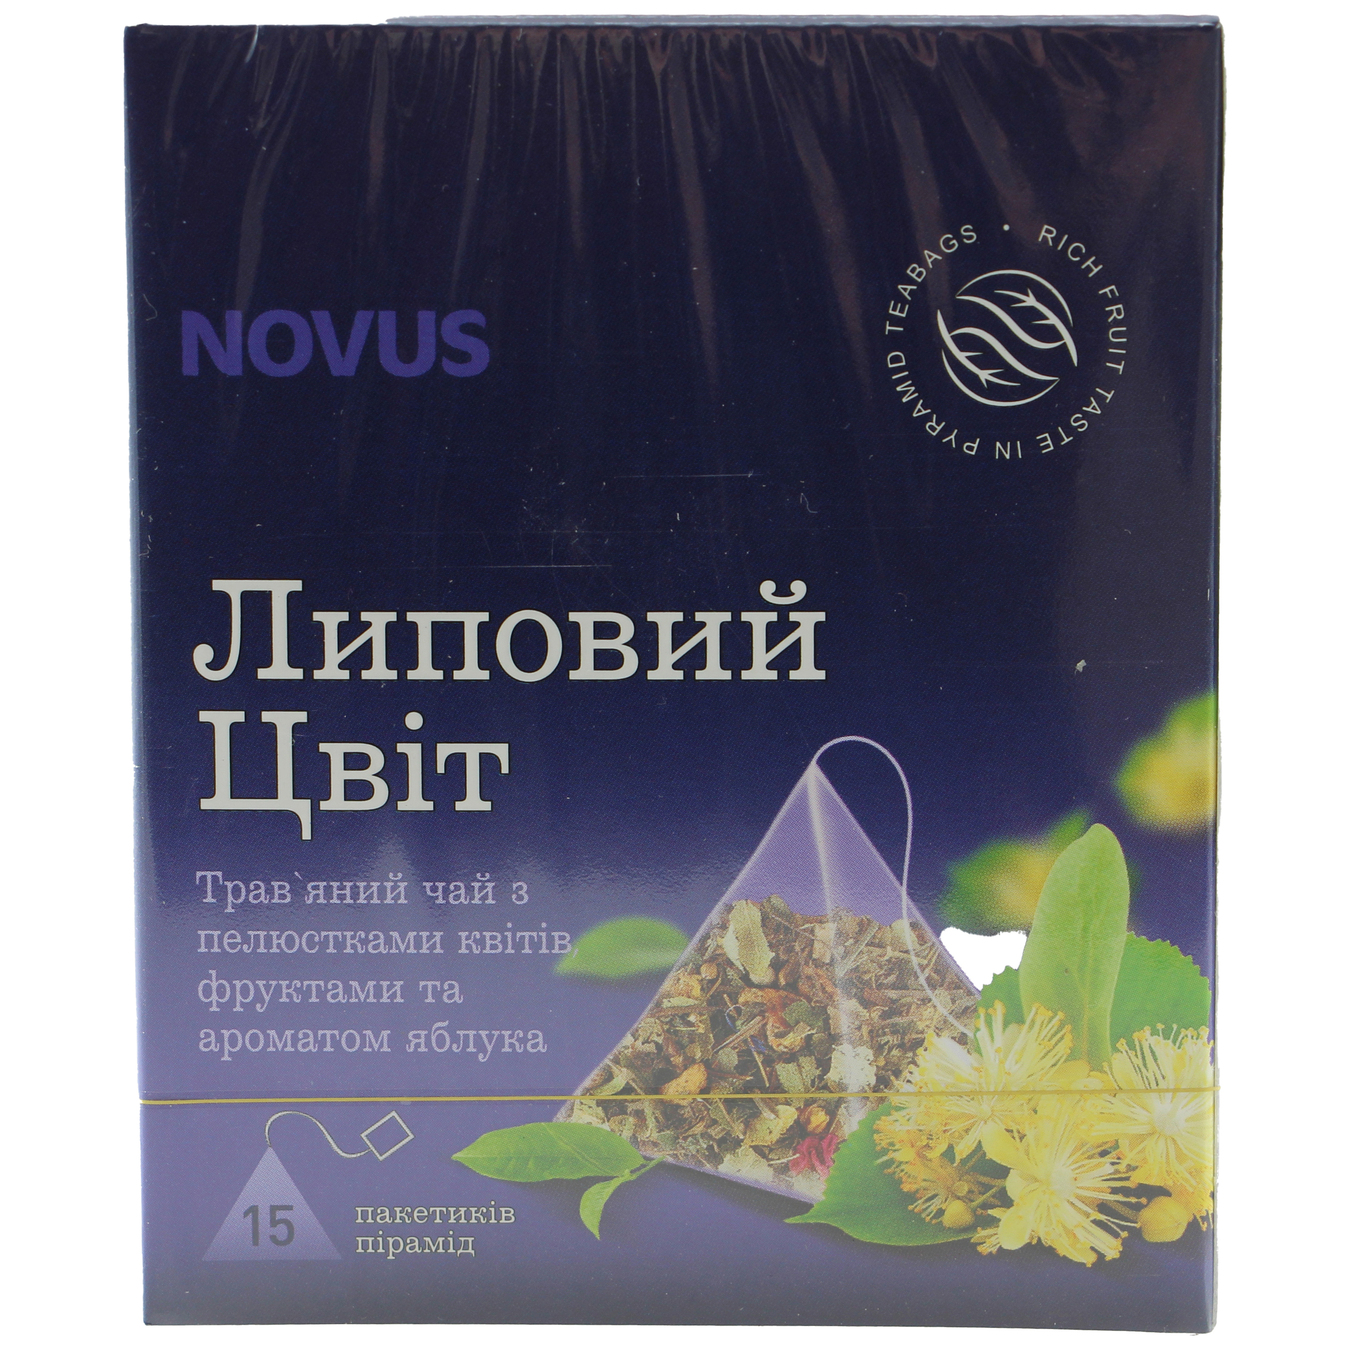 Novus Linden Blossom Herbal Tea with Fruits, Flower Petals and Apple Aroma 2g*15pcs